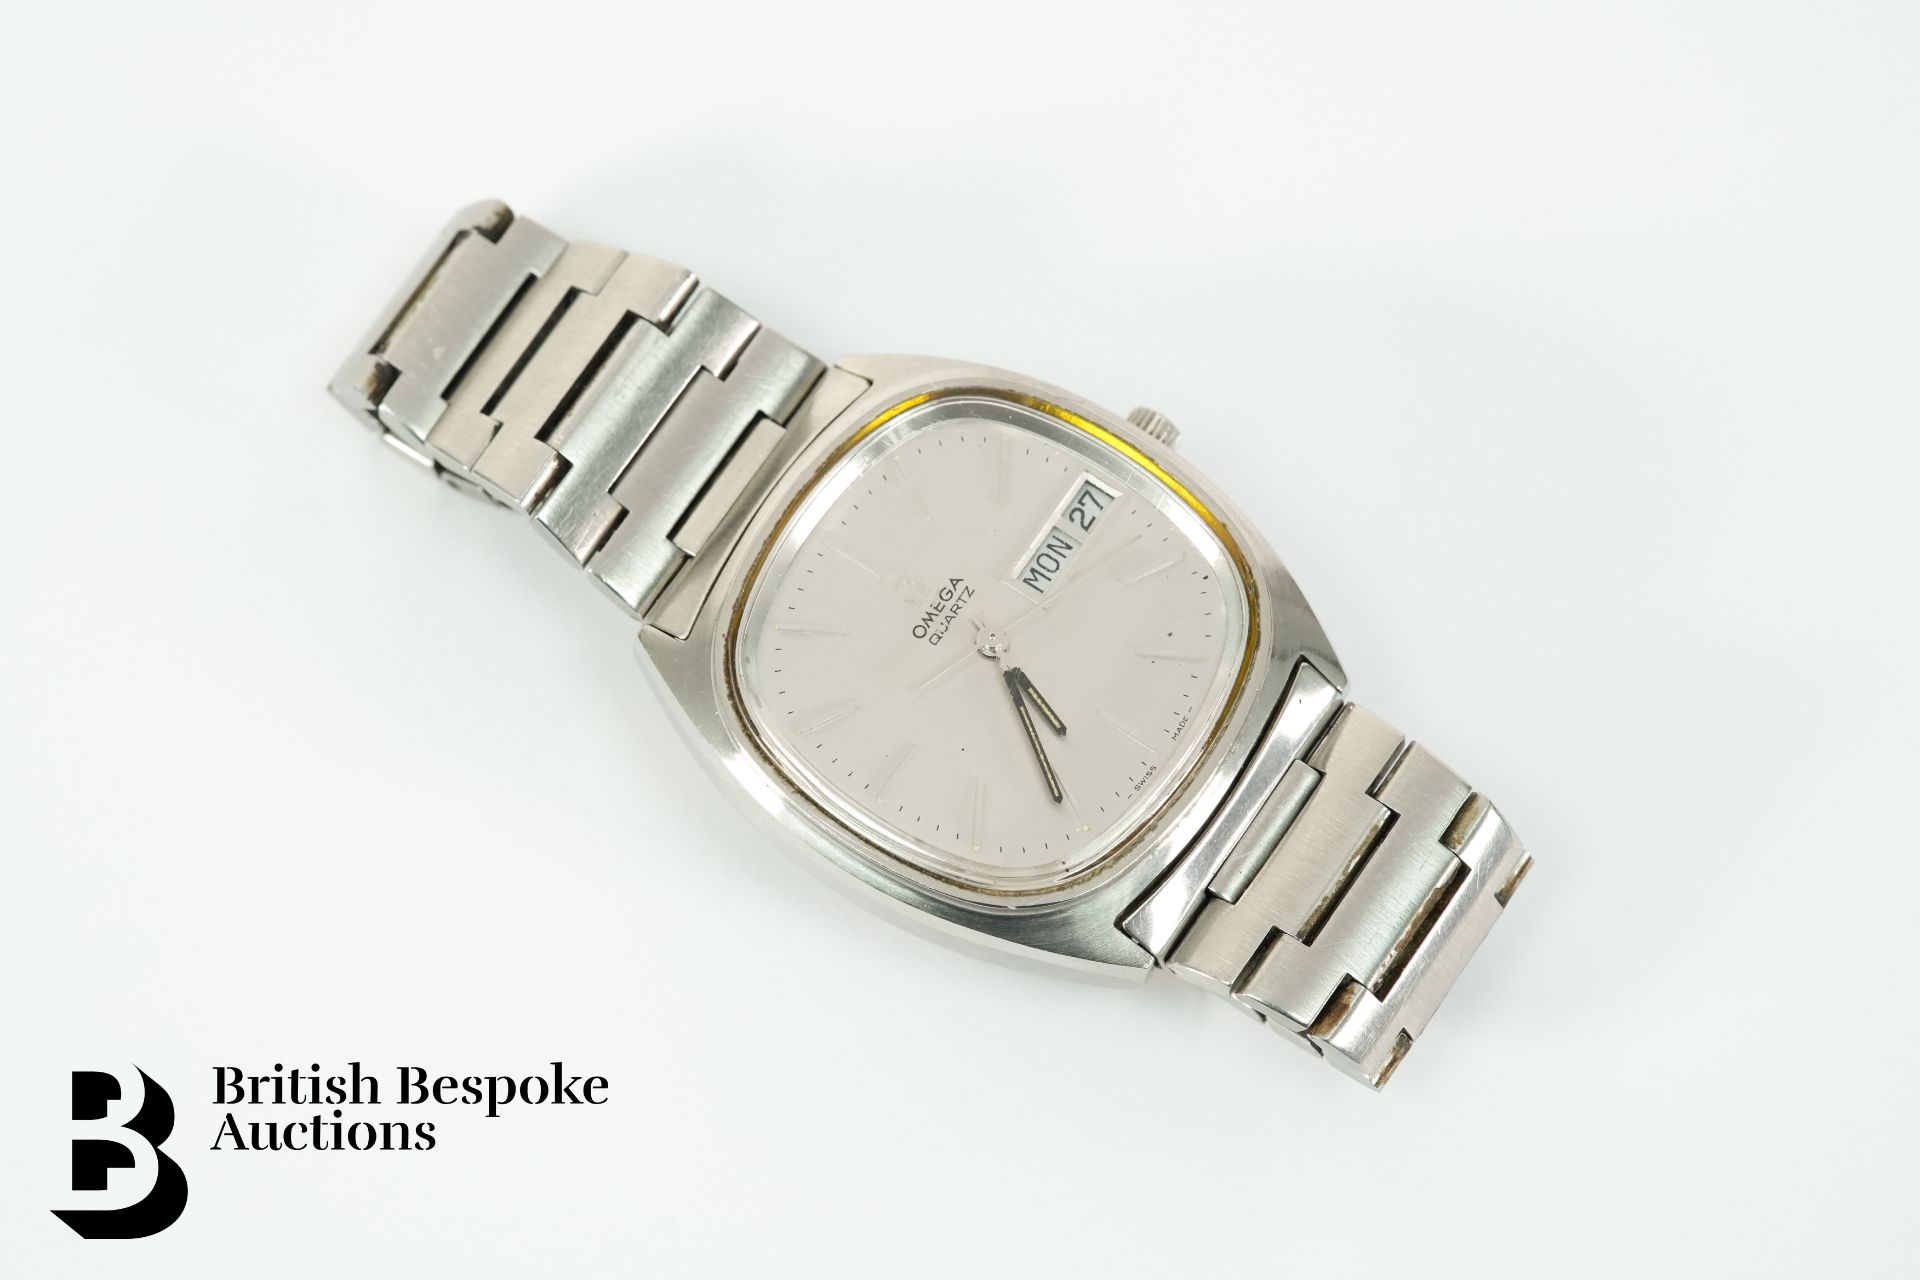 Stainless Steel Omega Wrist Watch - Image 2 of 4